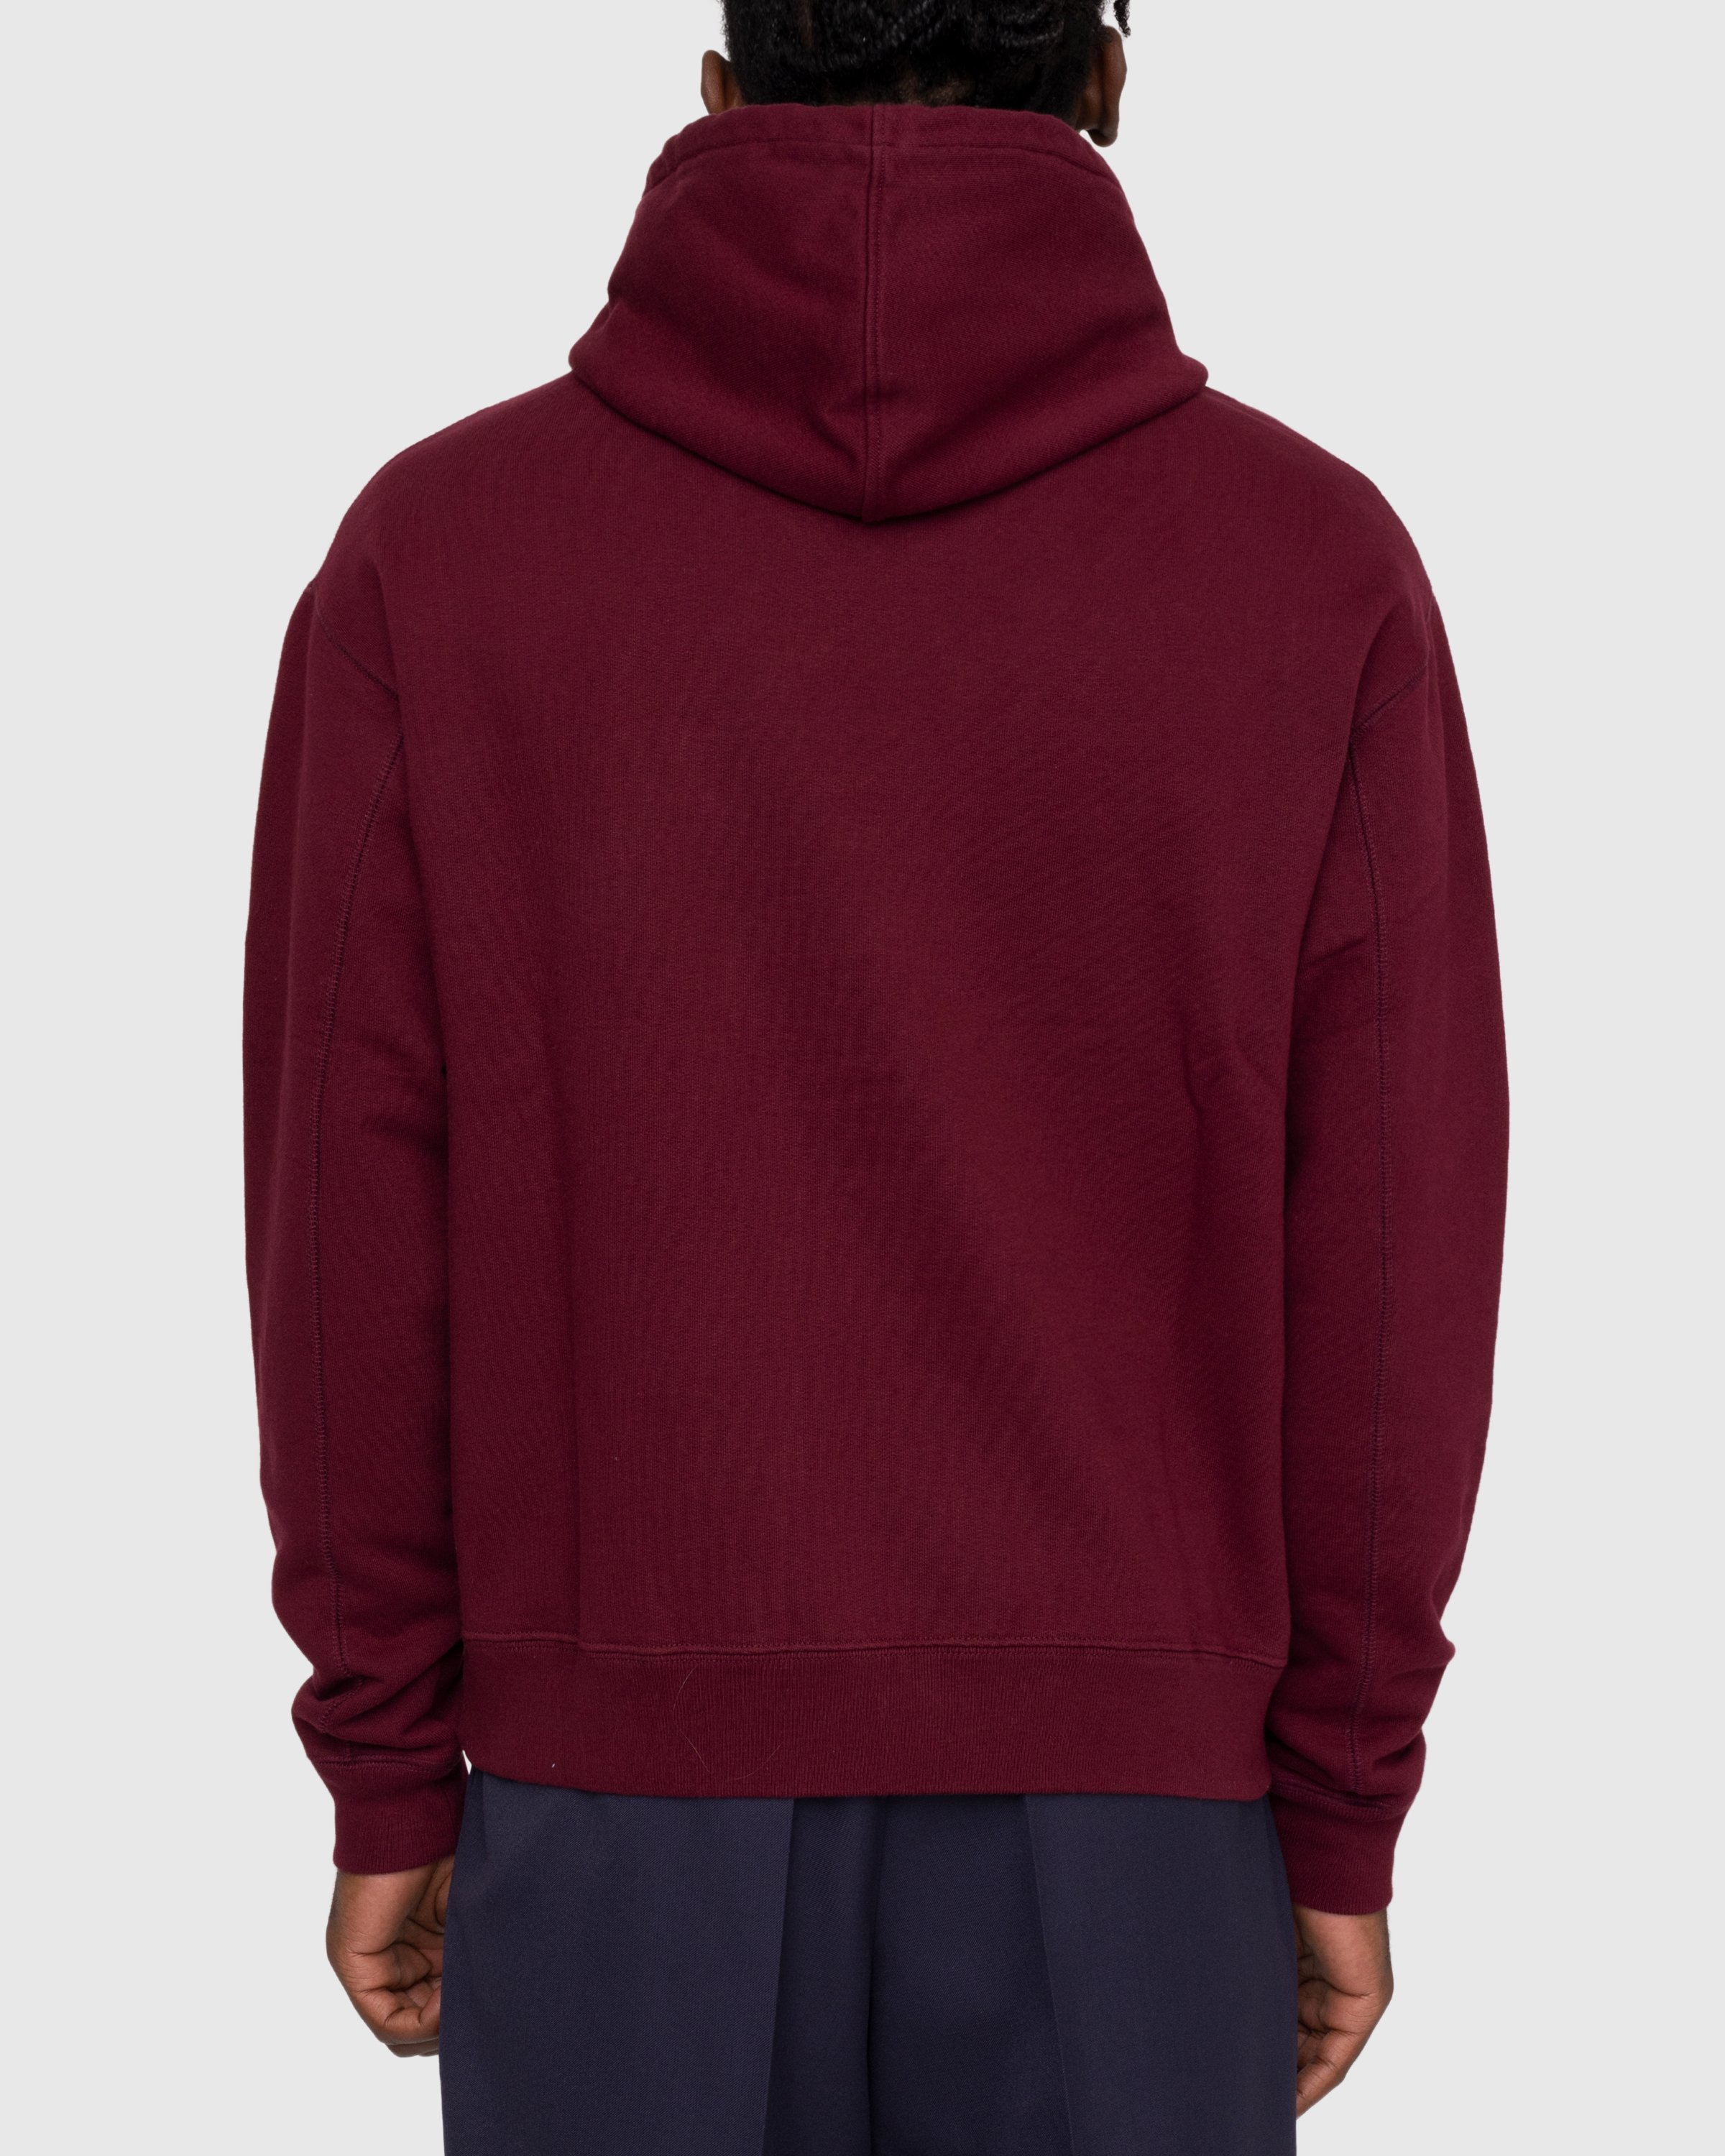 Highsnobiety - Classic Fleece Hoodie Bordeaux - Clothing - Red - Image 4